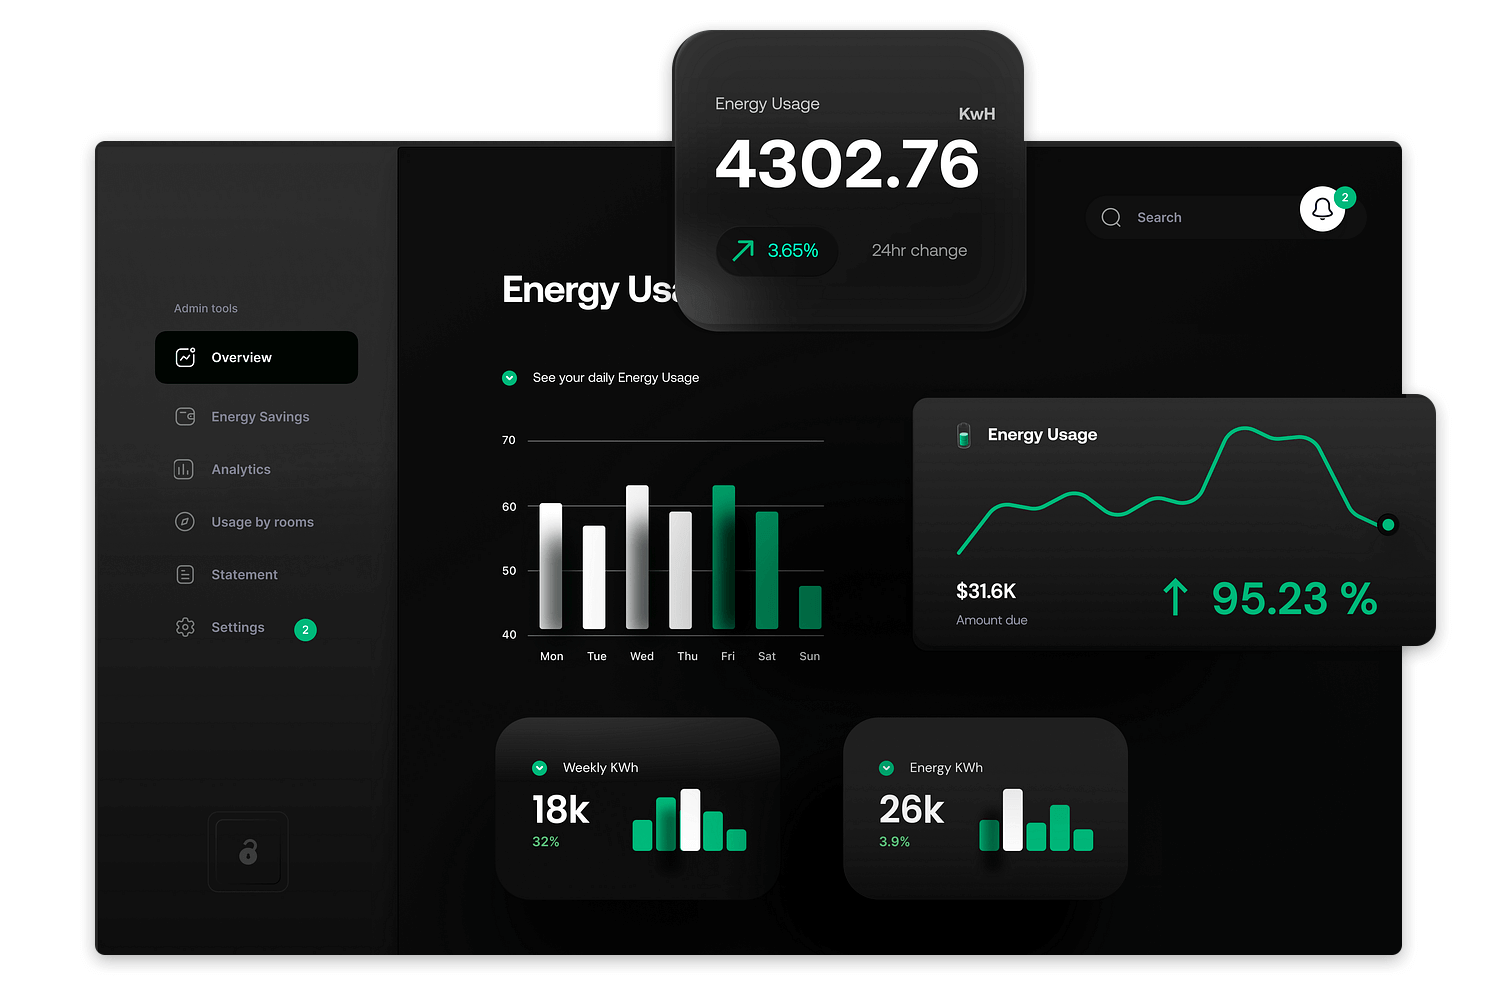 Simple energy usage data visualization dashboard with daily, weekly, and total energy usage metrics